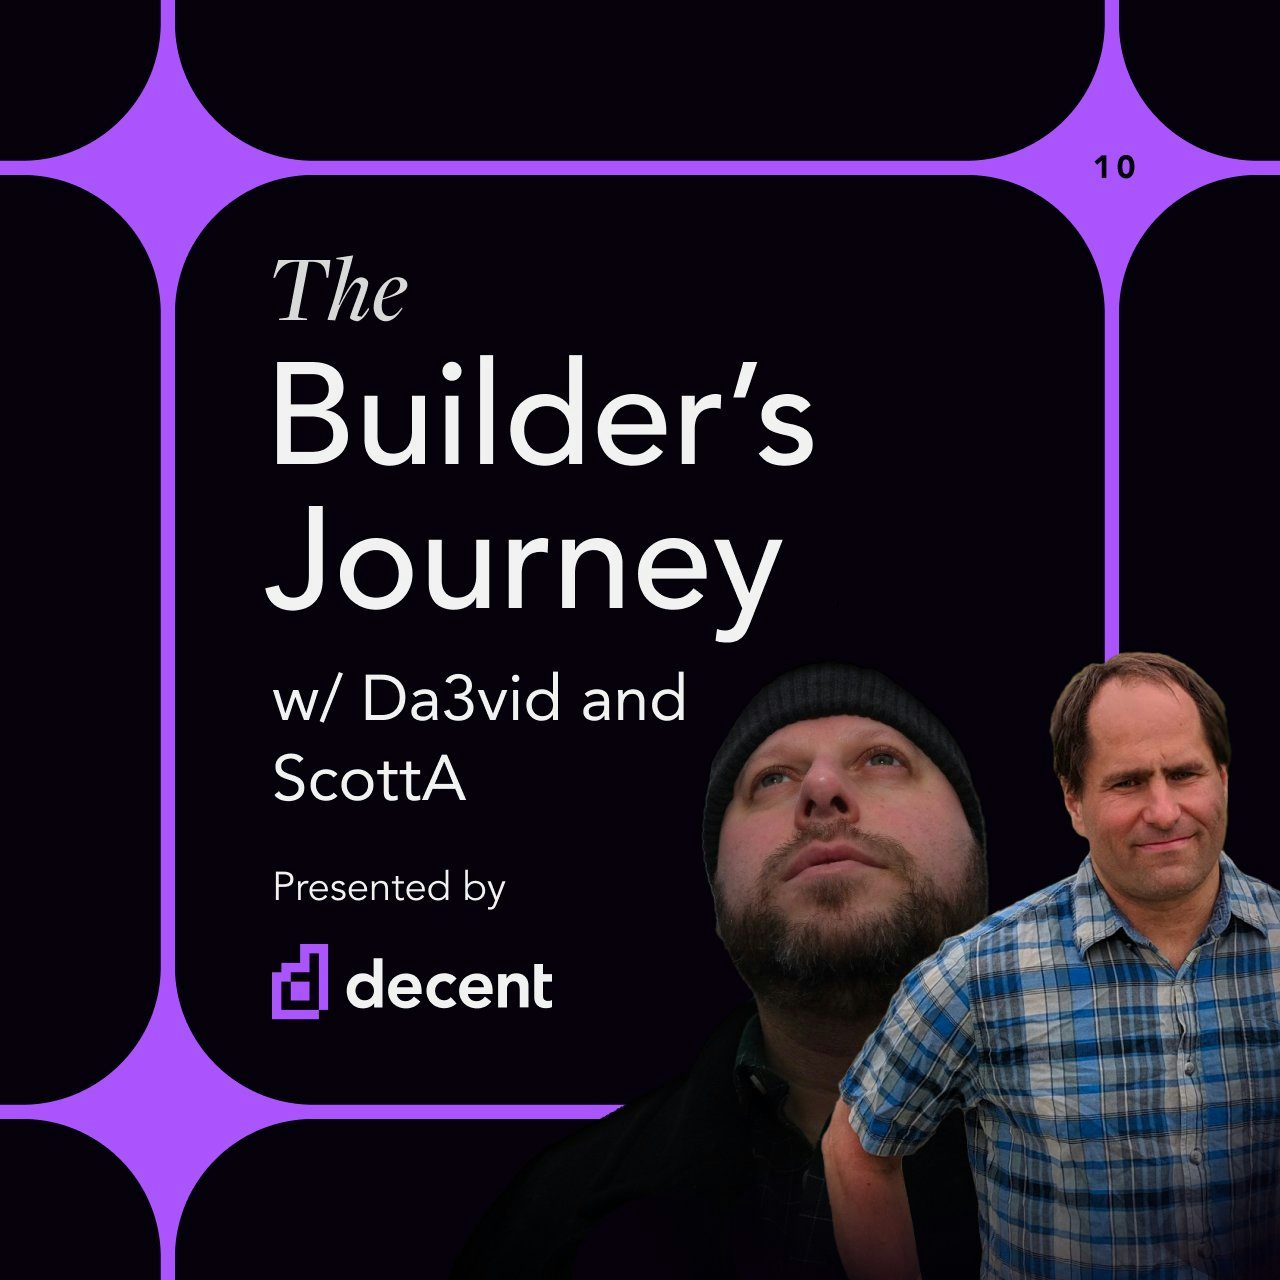 On this episode of the Builder's Journey, we chatted with Da3vid and ScottA of CityDAO. CityDAO is building a web3 city of the future. They discuss their backgrounds meeting in the DAO, the unique elements that make up CityDAO, and the critical next steps for building a community and city on-chain.